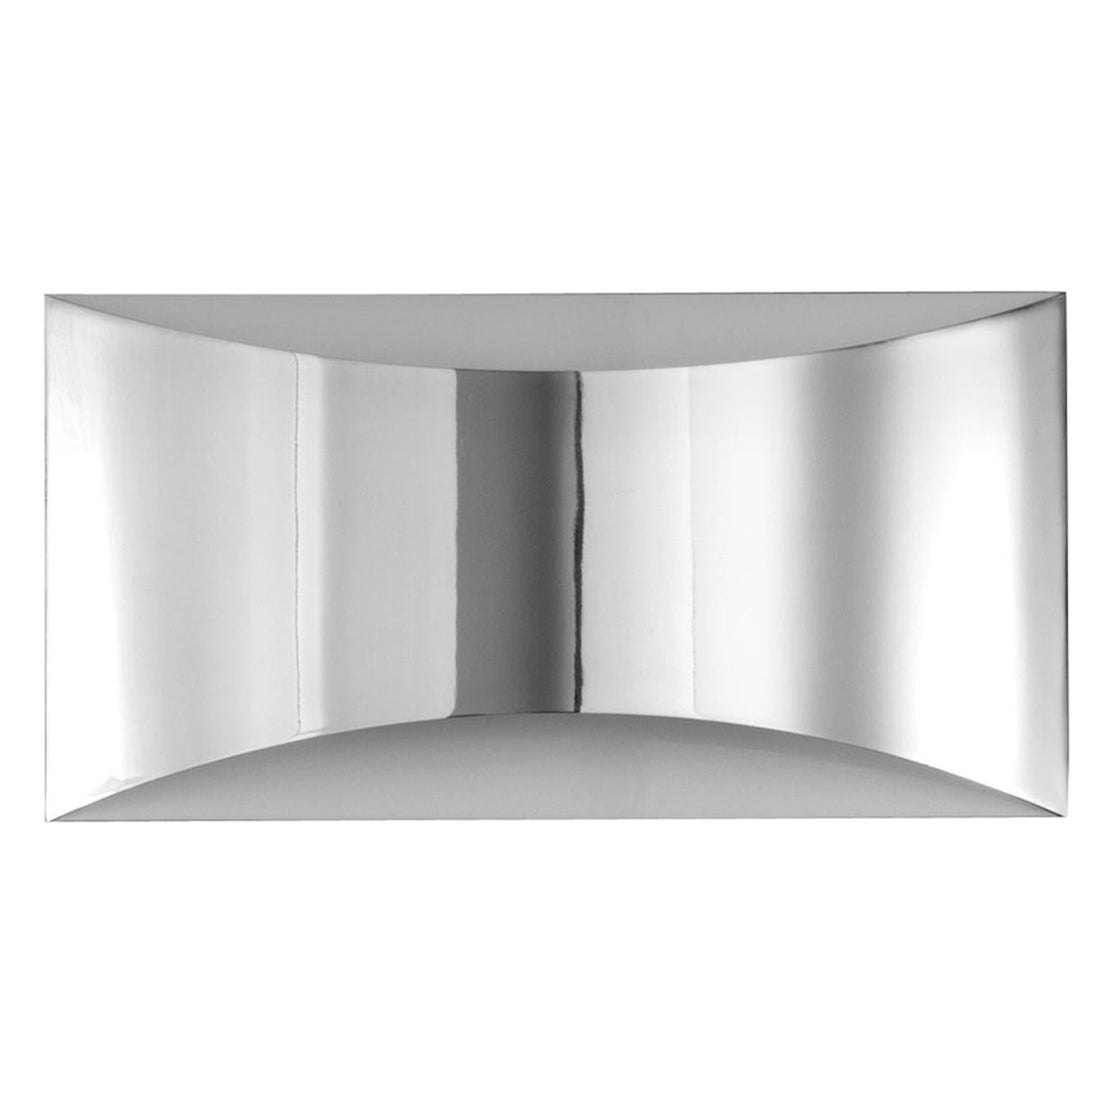 Design Studio 63 Wall Lamp 'Kelly' Chromium-Plated by Oluce For Sale